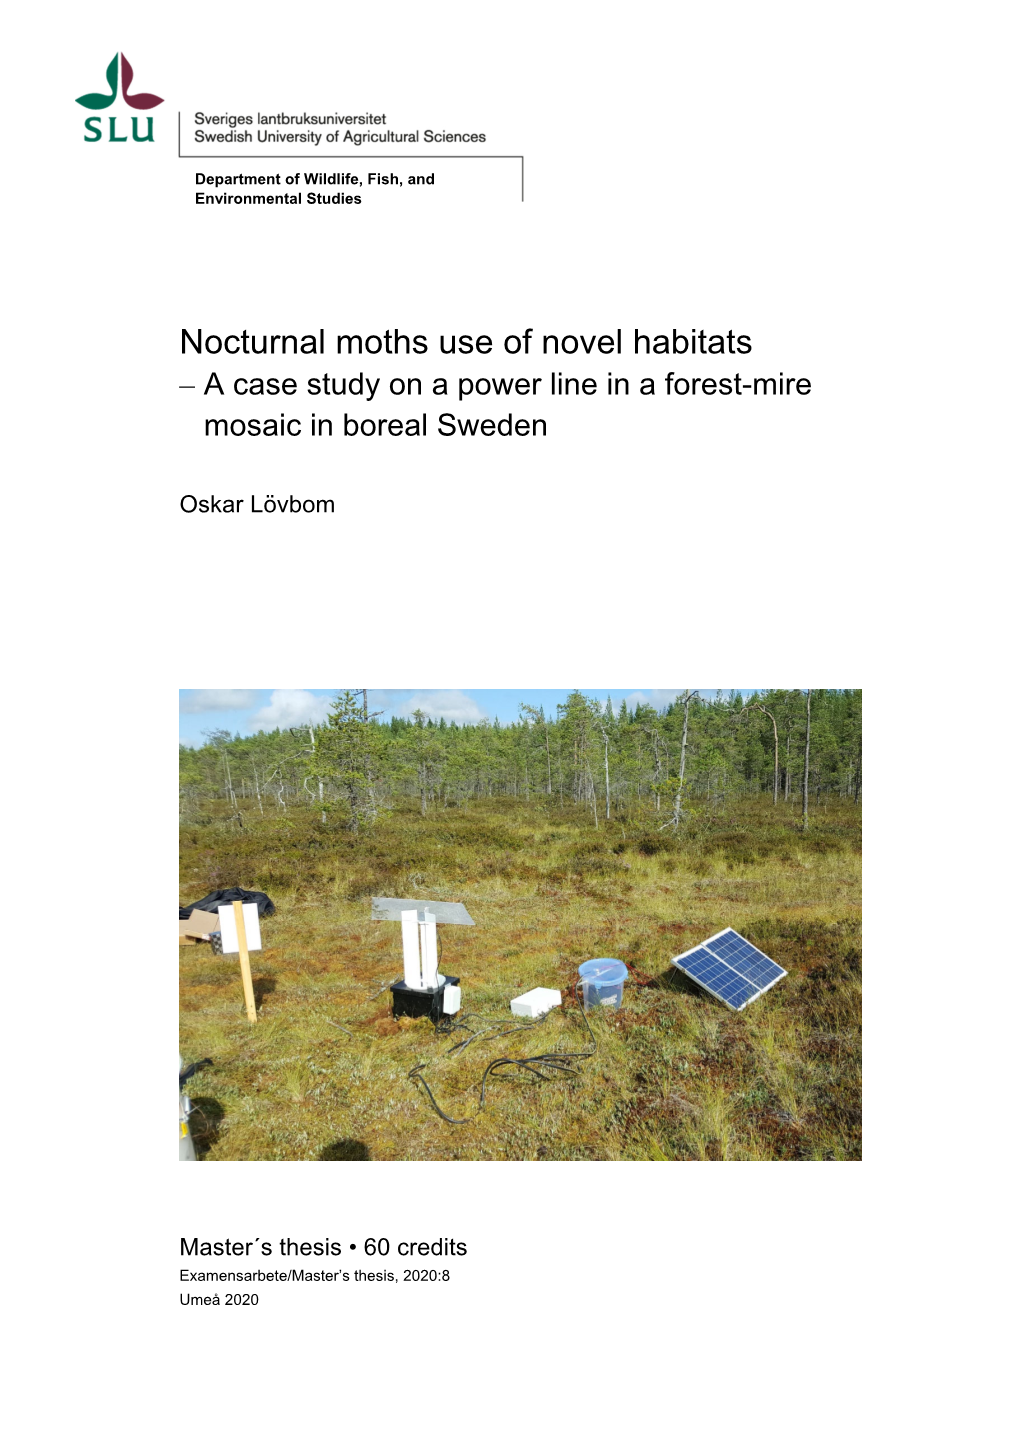 Nocturnal Moths Use of Novel Habitats – a Case Study on a Power Line in a Forest-Mire Mosaic in Boreal Sweden